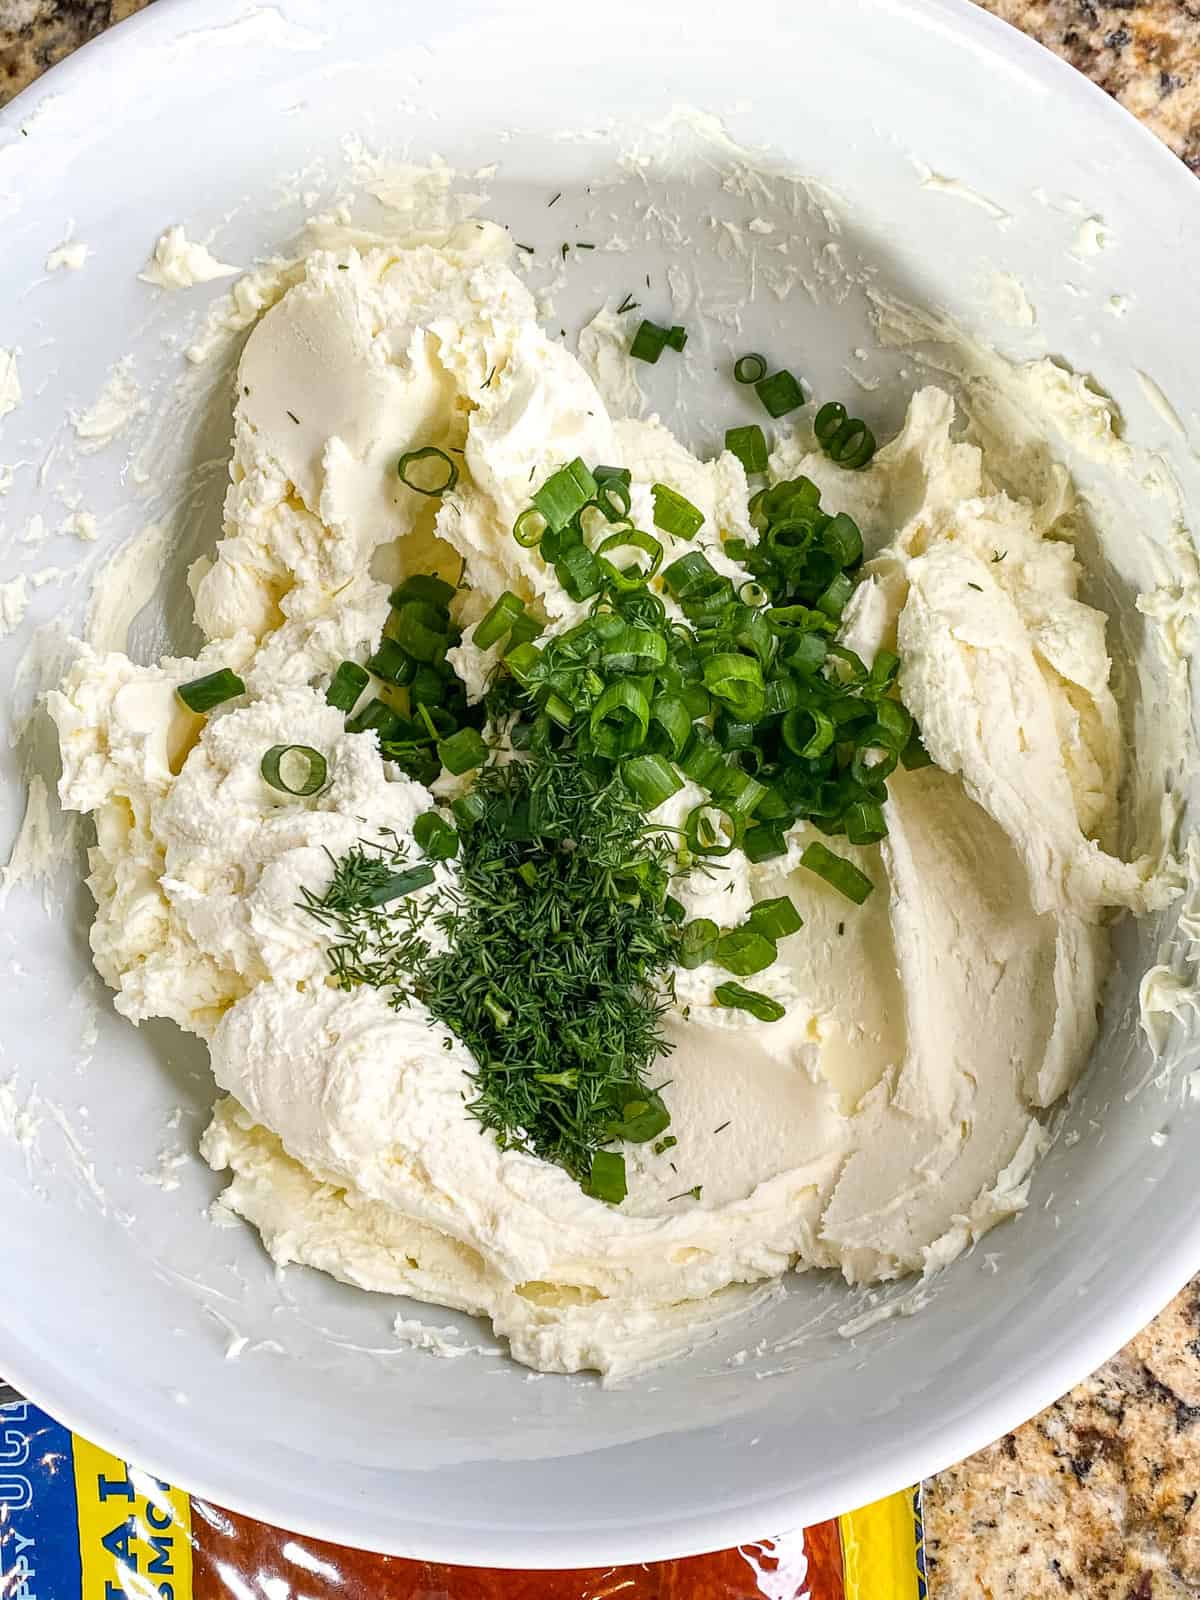 A bowl of mascarpone with chopped dill and green onions.